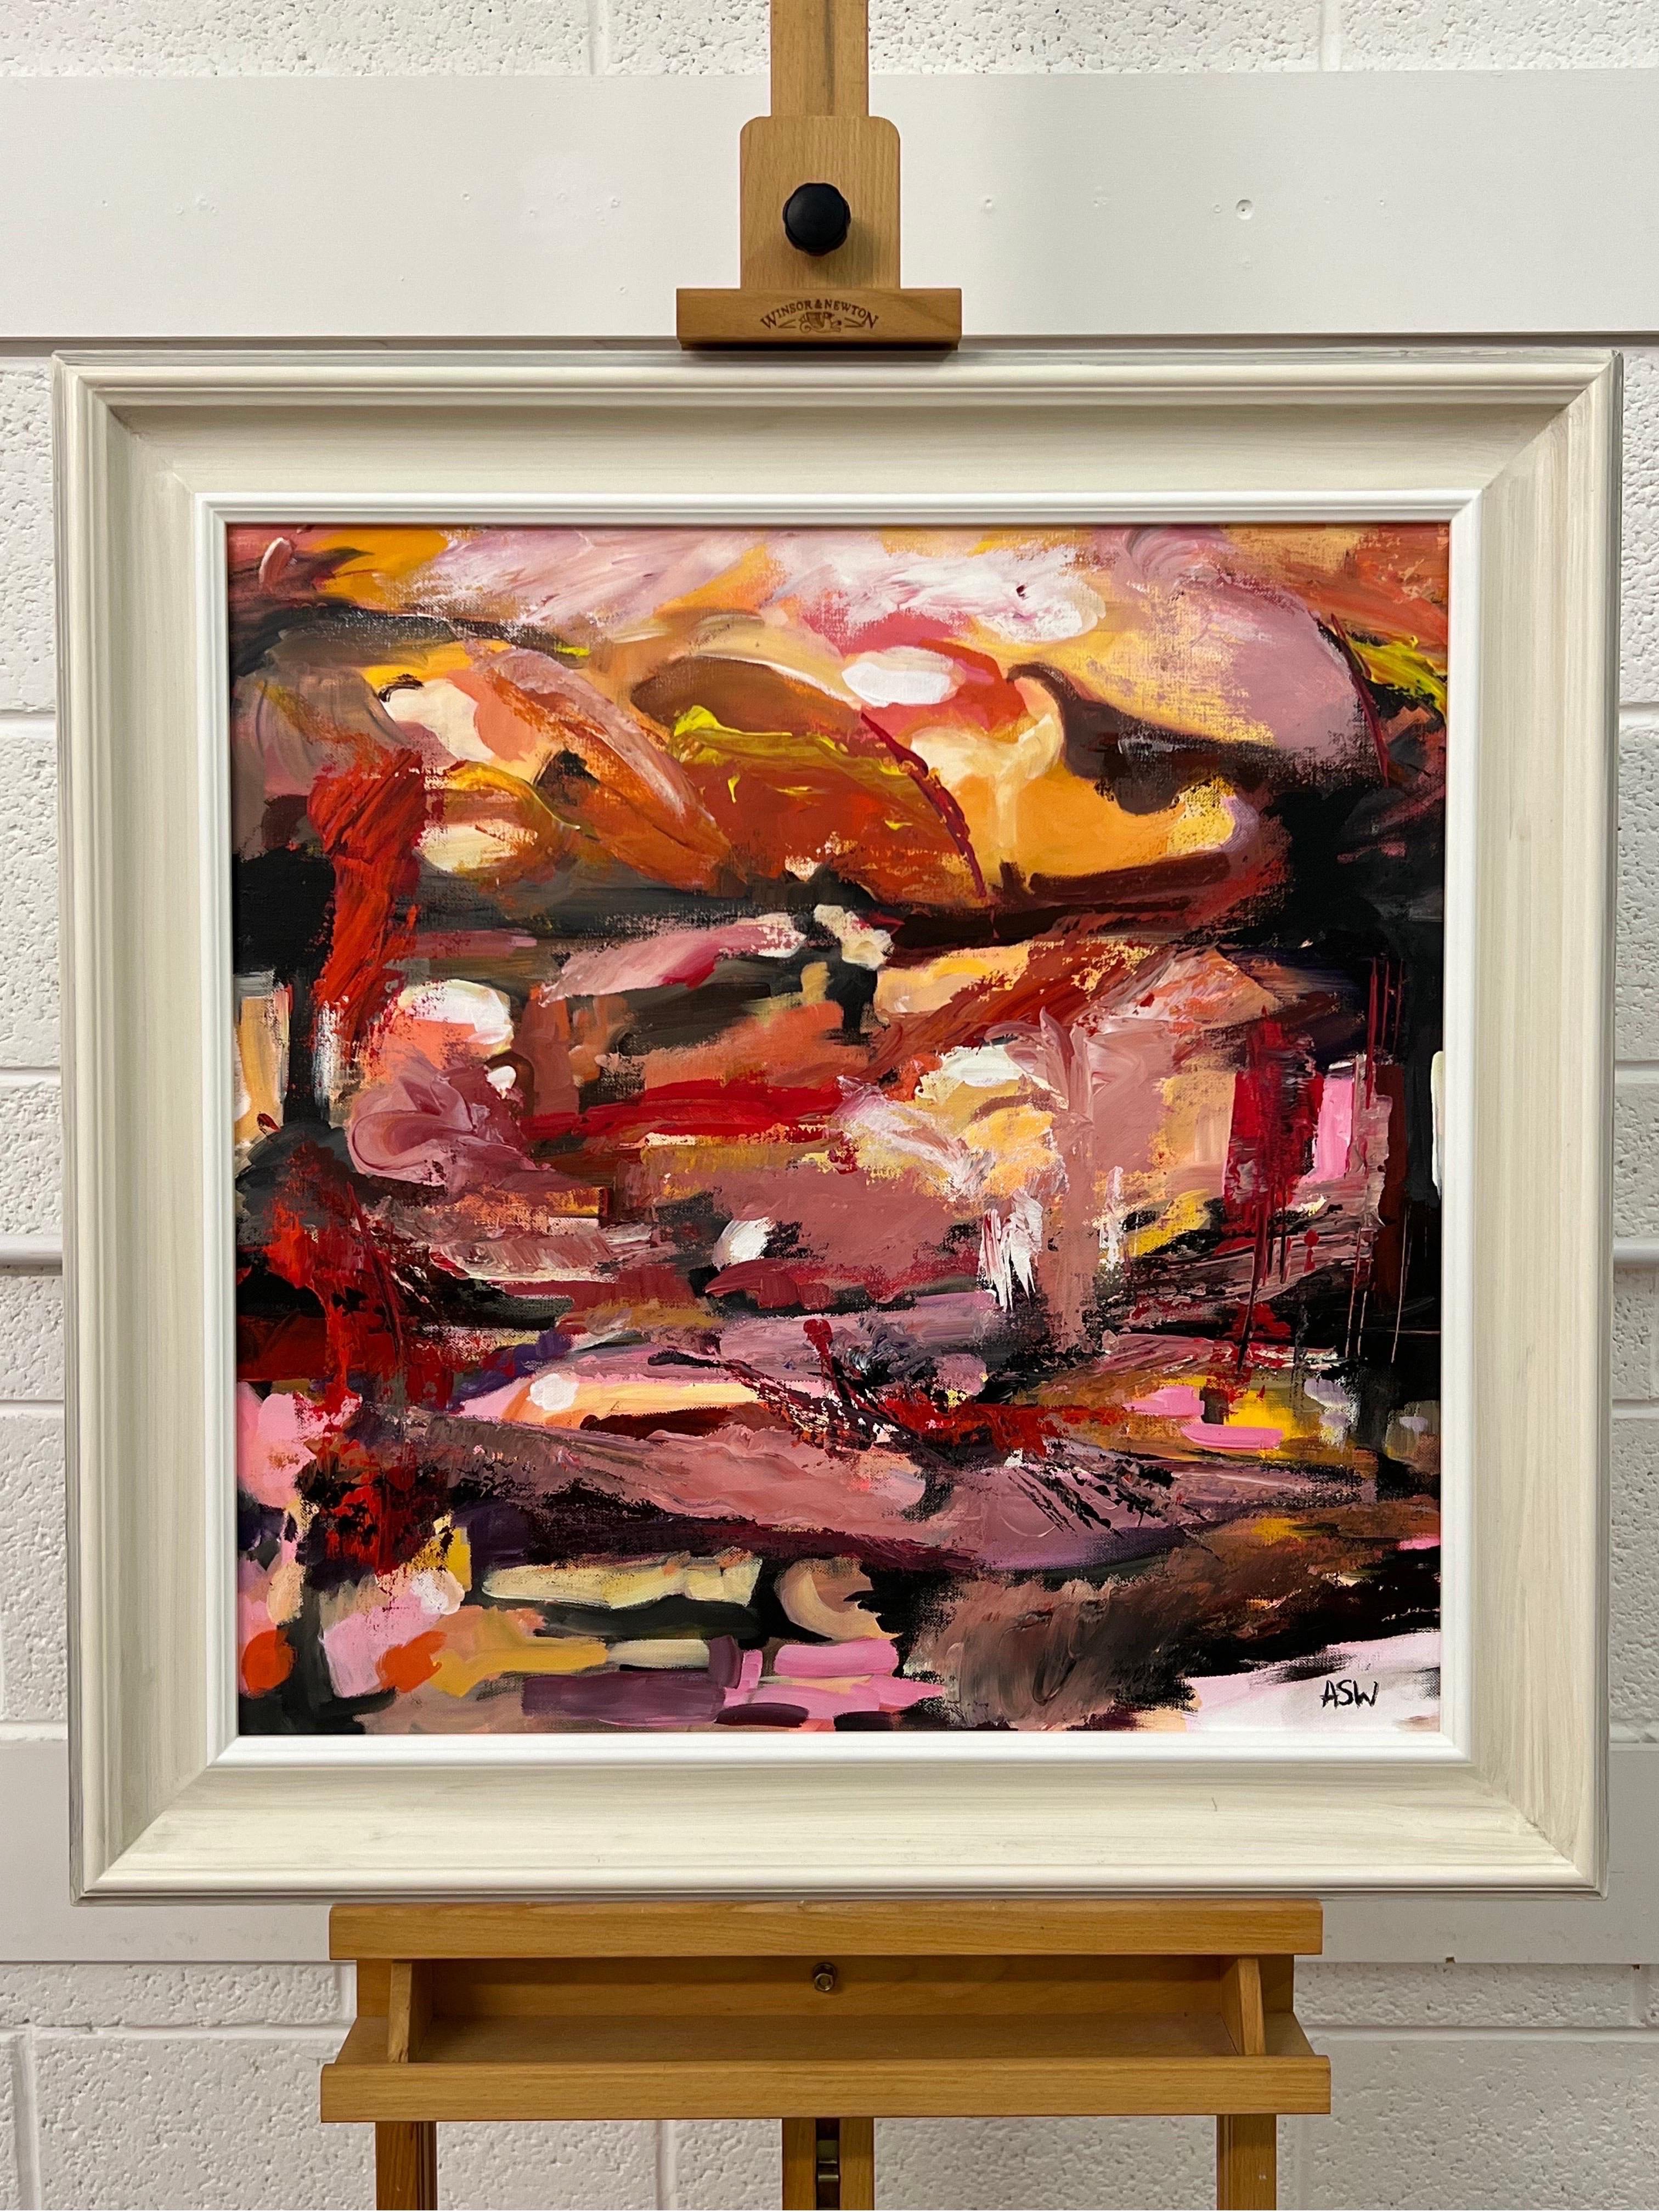 Abstract Expressionist Painting by Contemporary British Artist, Angela Wakefield, using rich pink, red, orange and black. 

Art measures 24 x 24 inches
Frame measures 29 x 29 inches

This painting, framed in a classic light-colored frame, showcases